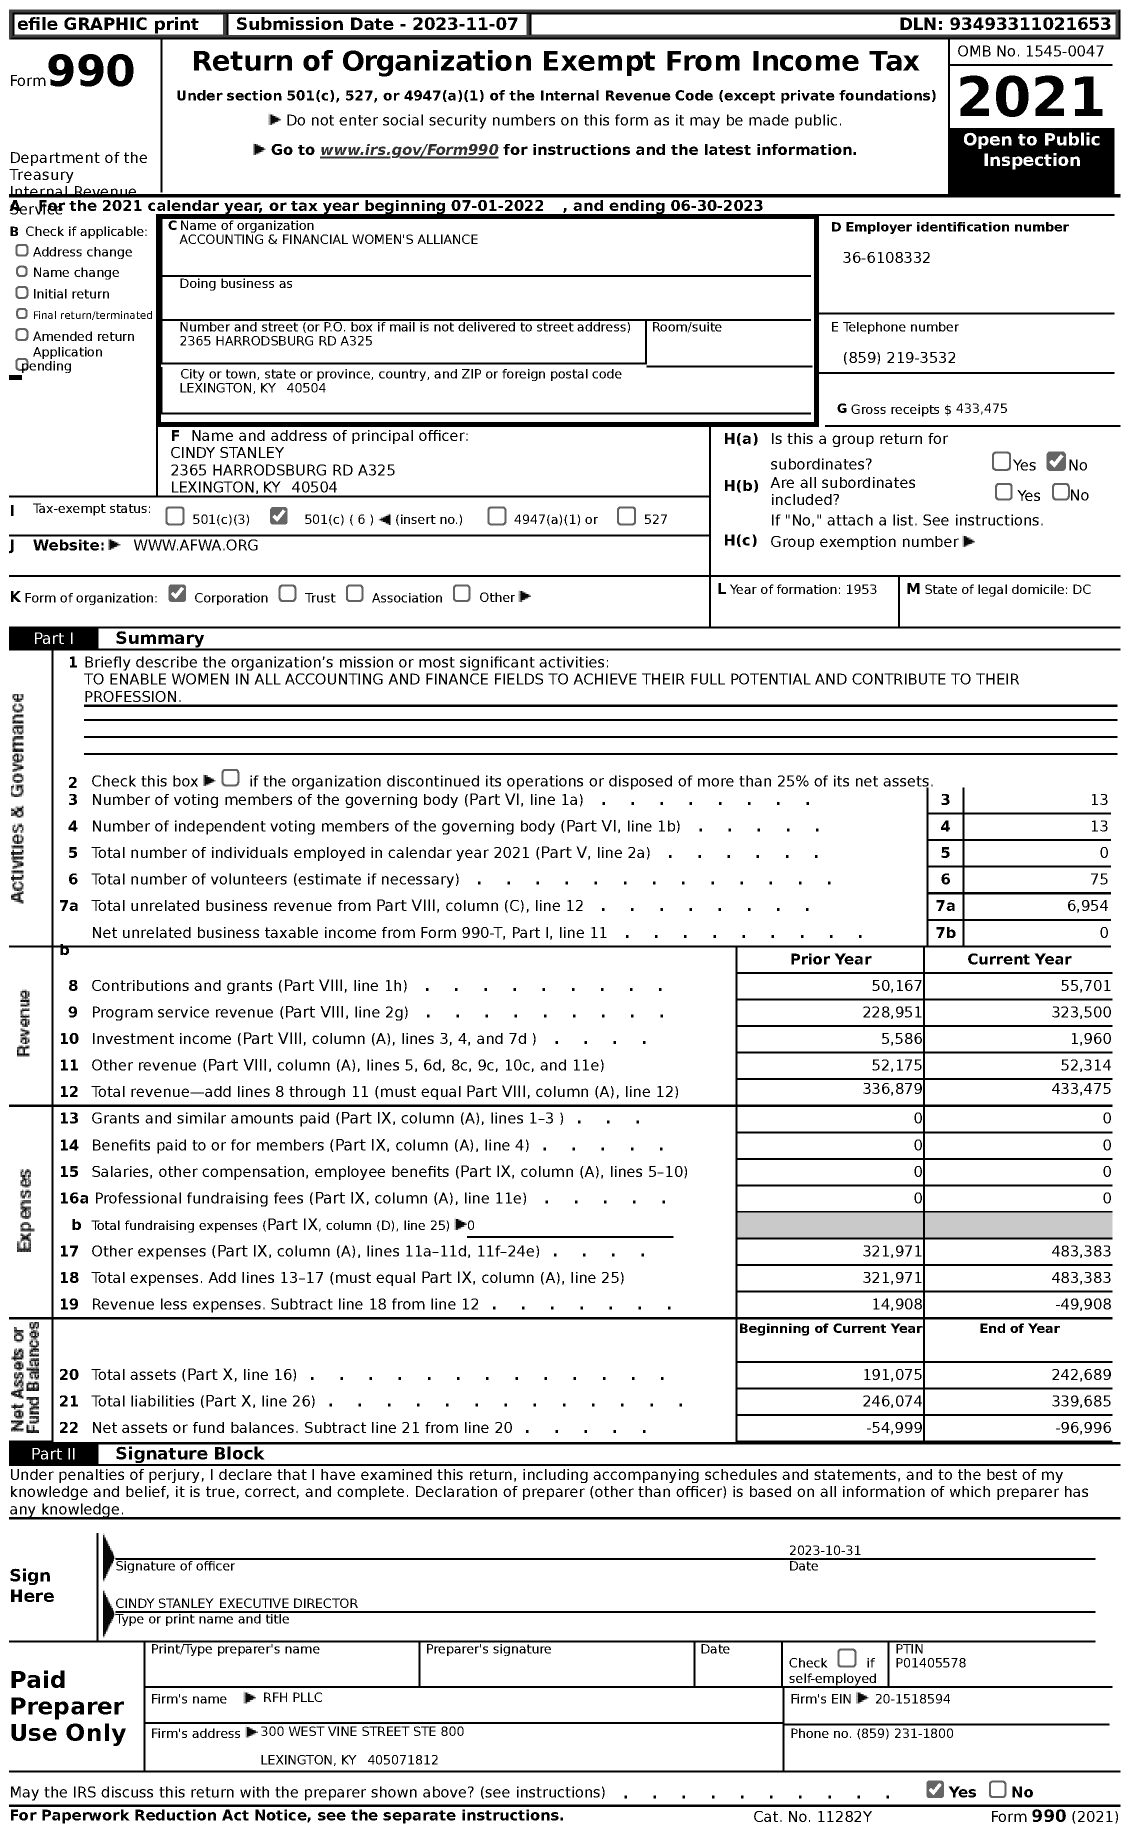 Image of first page of 2022 Form 990 for Accounting and Financial Women's Alliance